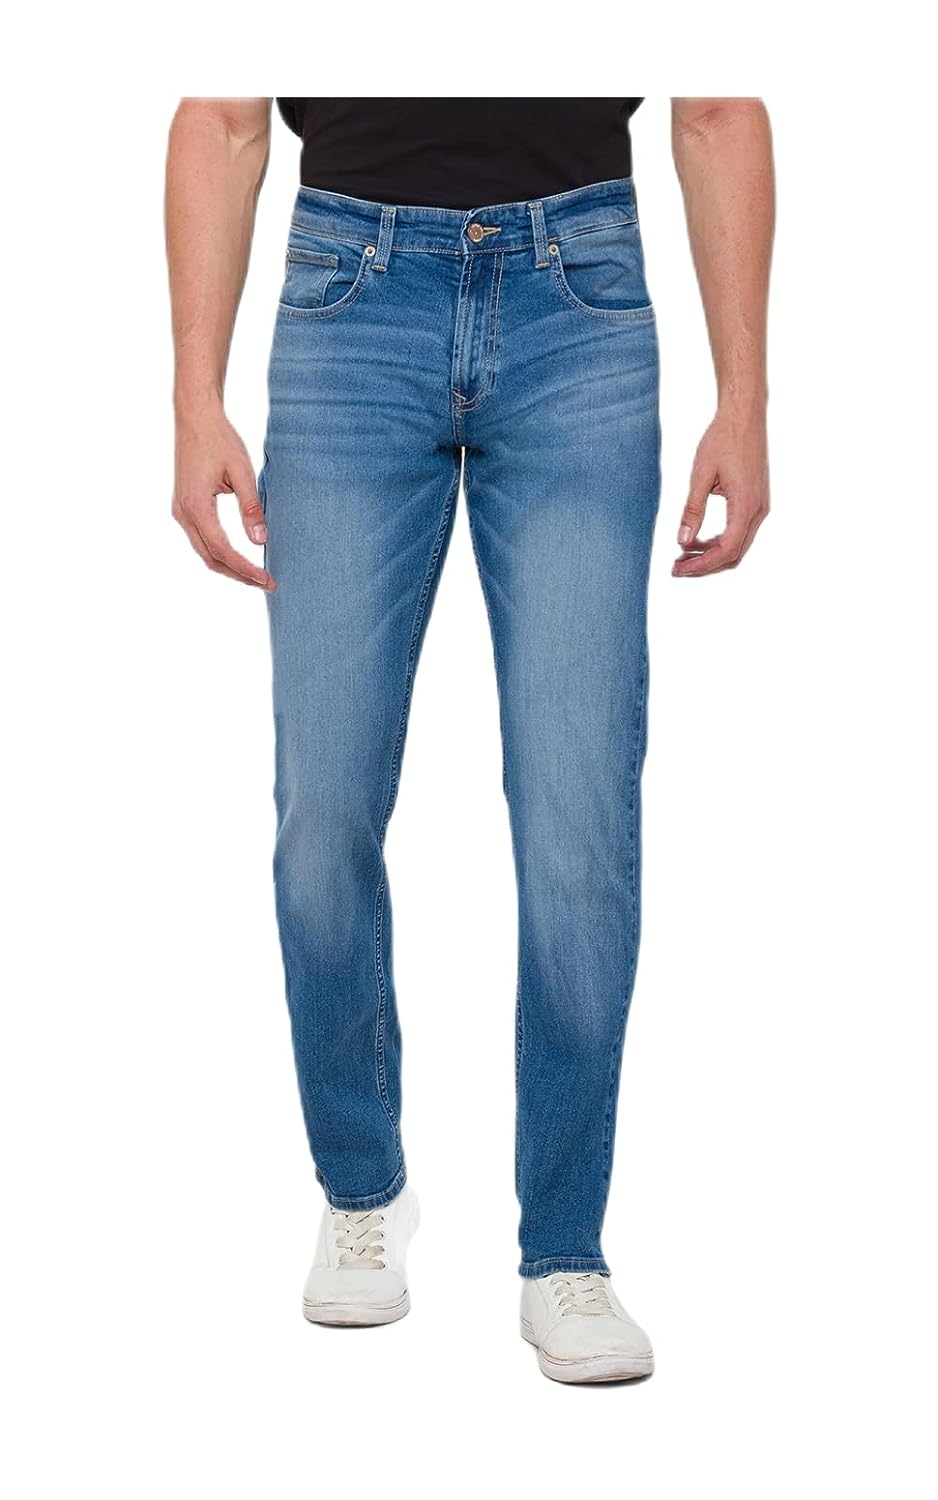 China Jeans Manufacturers: Best Quality and Style